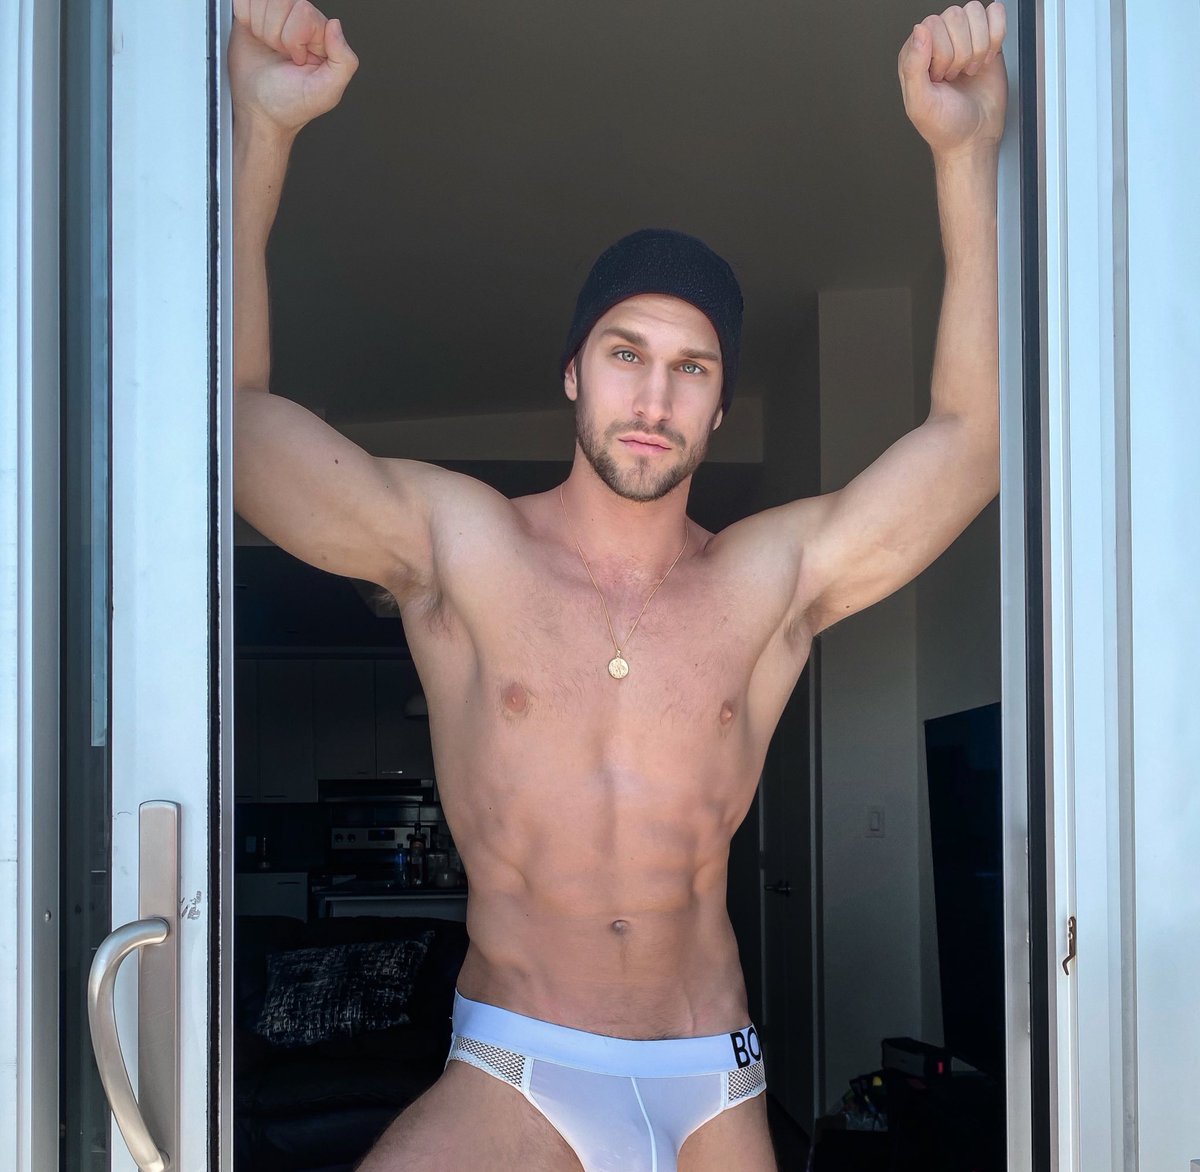 Is it acceptable to wear these all day? https://onlyfans.com/kylehynick 